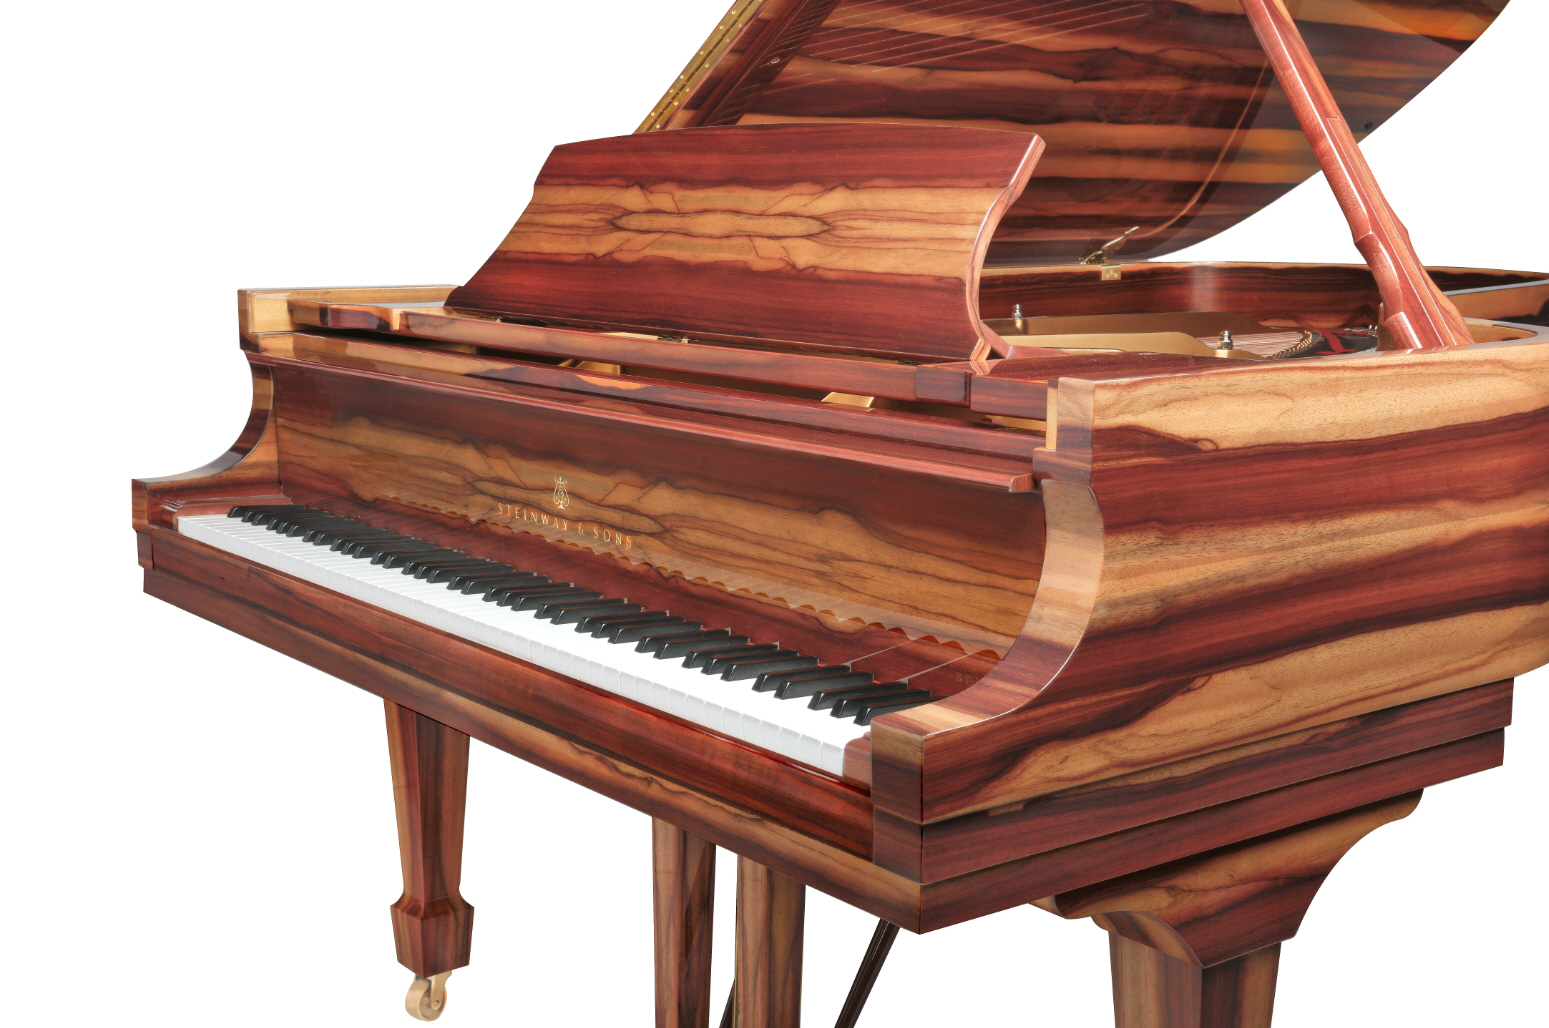 Kawai GL10 with QRS player system